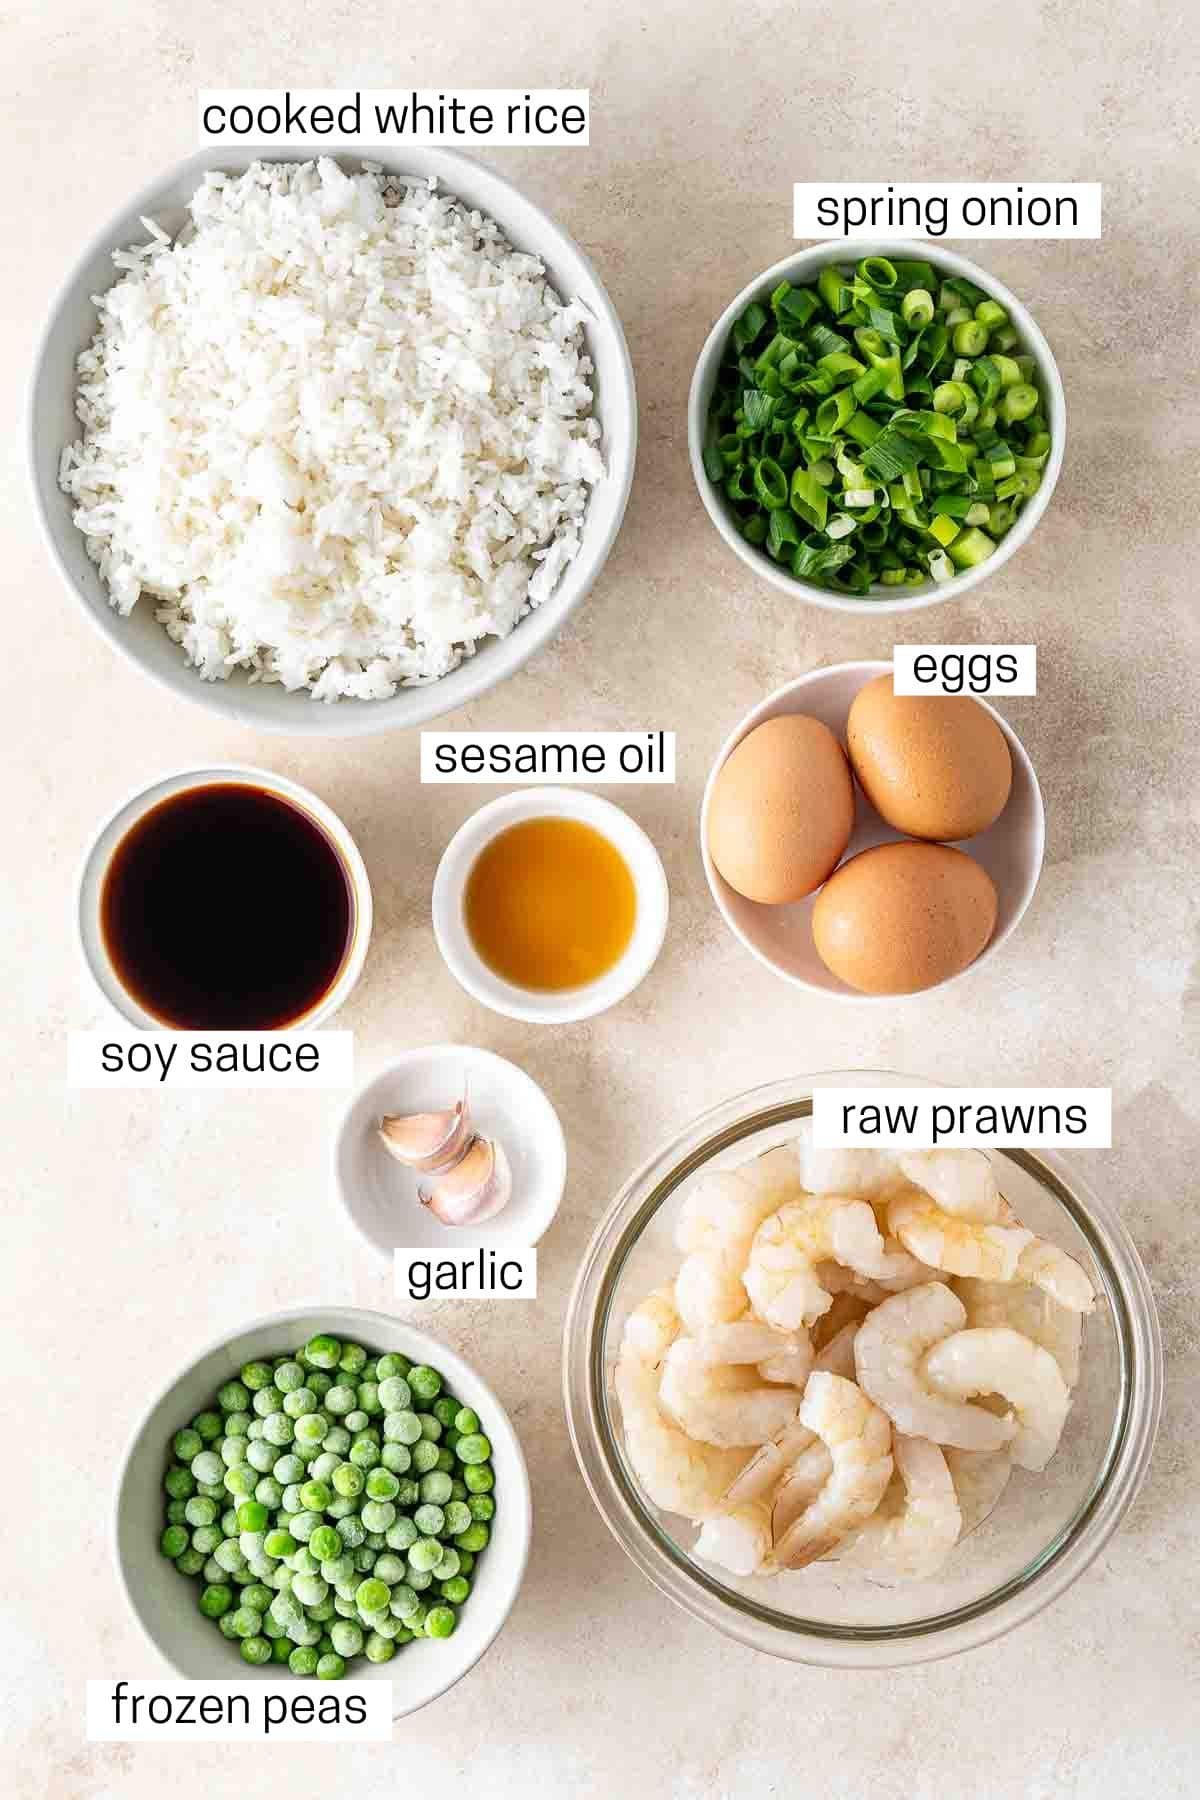 All ingredients needed to make prawn and egg fried rice.